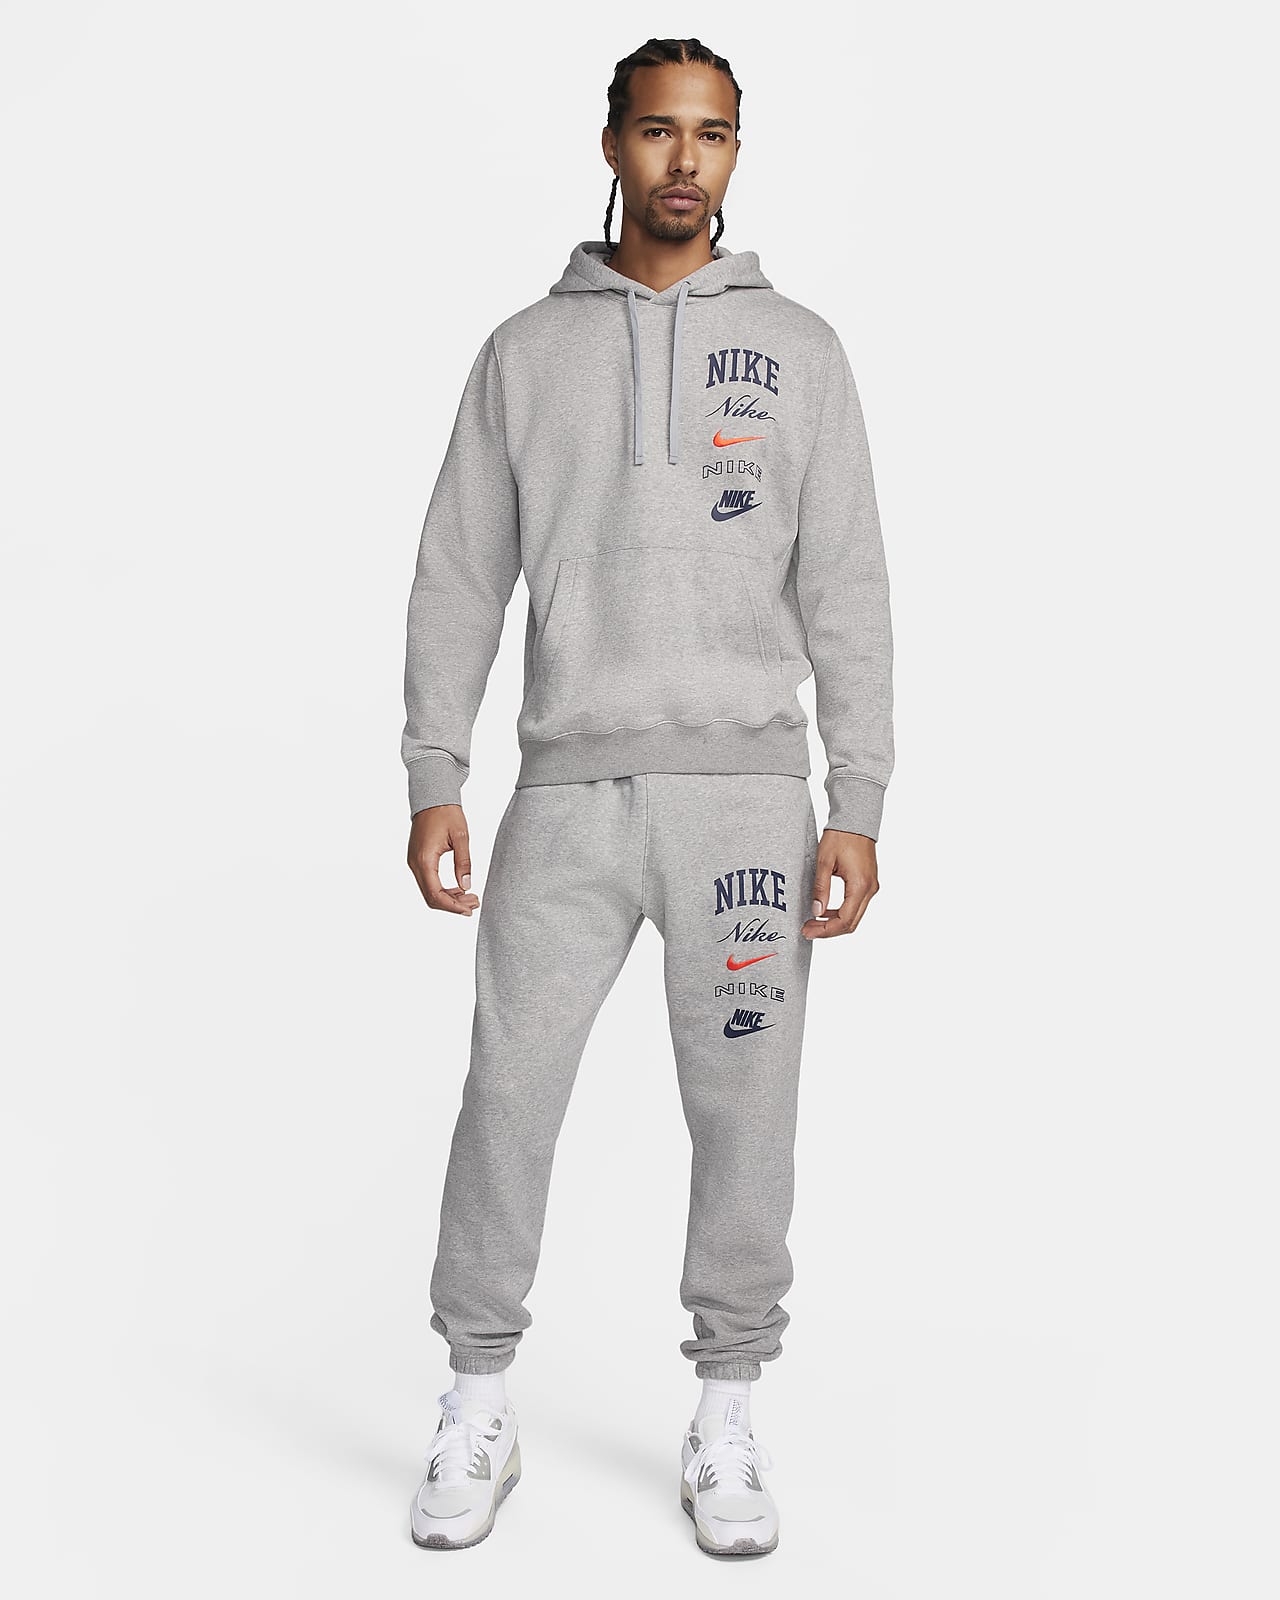 https://static.nike.com/a/images/t_PDP_1280_v1/f_auto,q_auto:eco/1321485e-b02a-47ee-8acc-016e1df8a0ed/club-fleece-pullover-hoodie-1sfFJ2.png